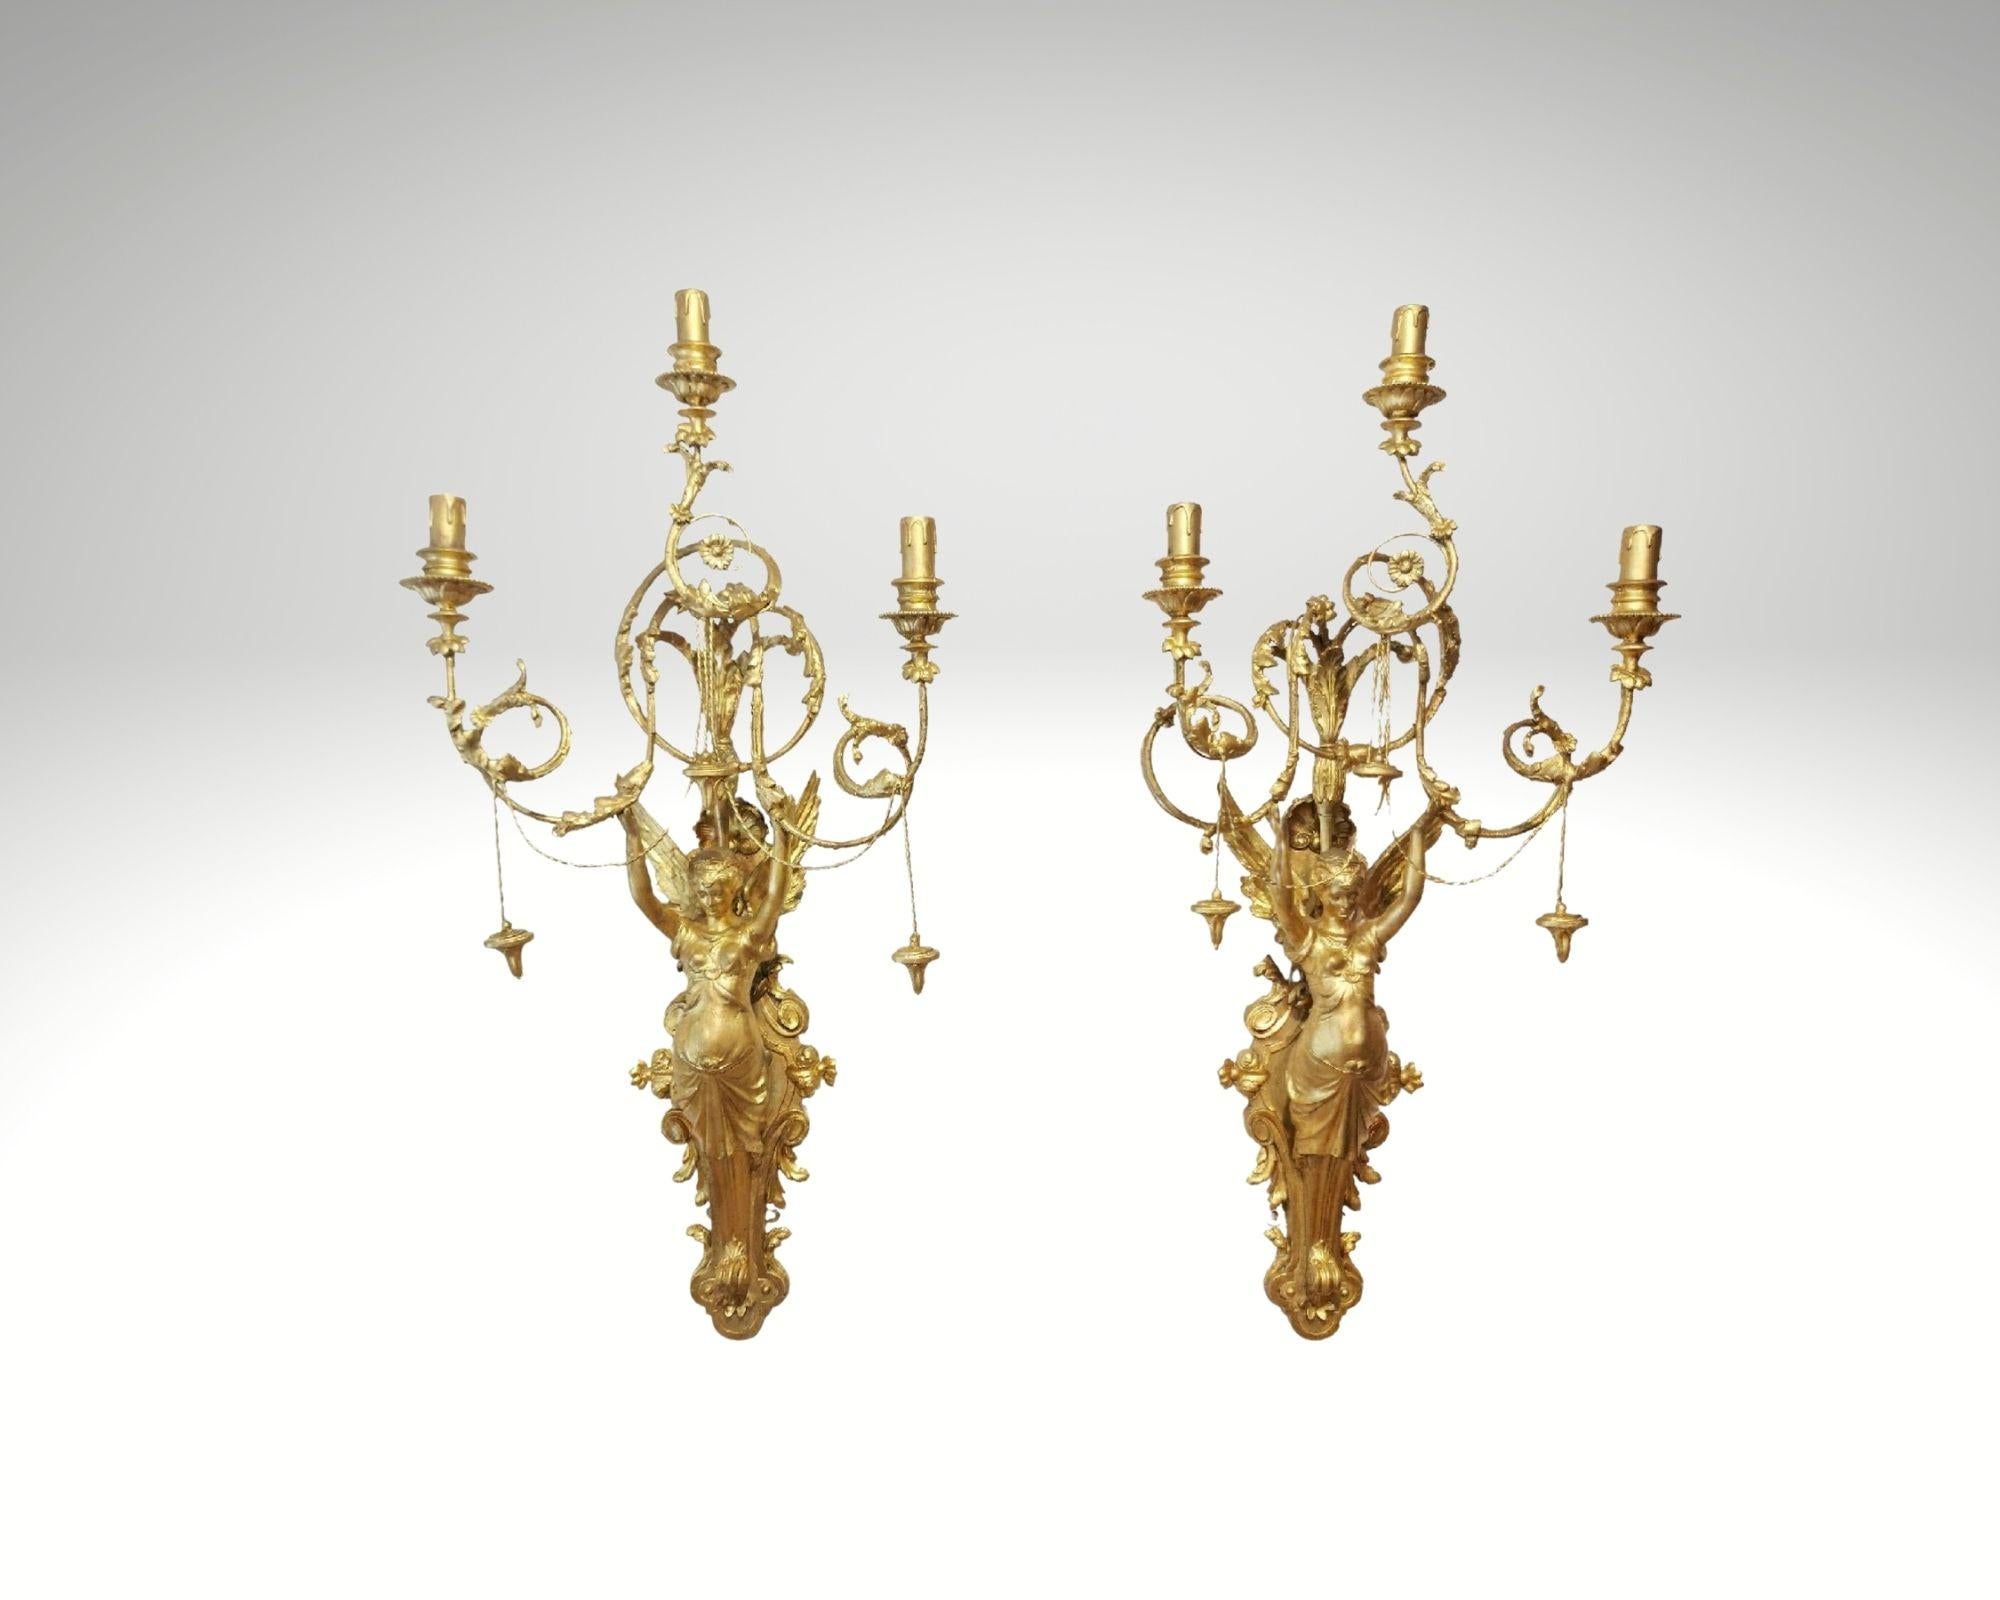 Pair of Italian Neoclassic Empire Gilt Wood Wall Sconces For Sale 3